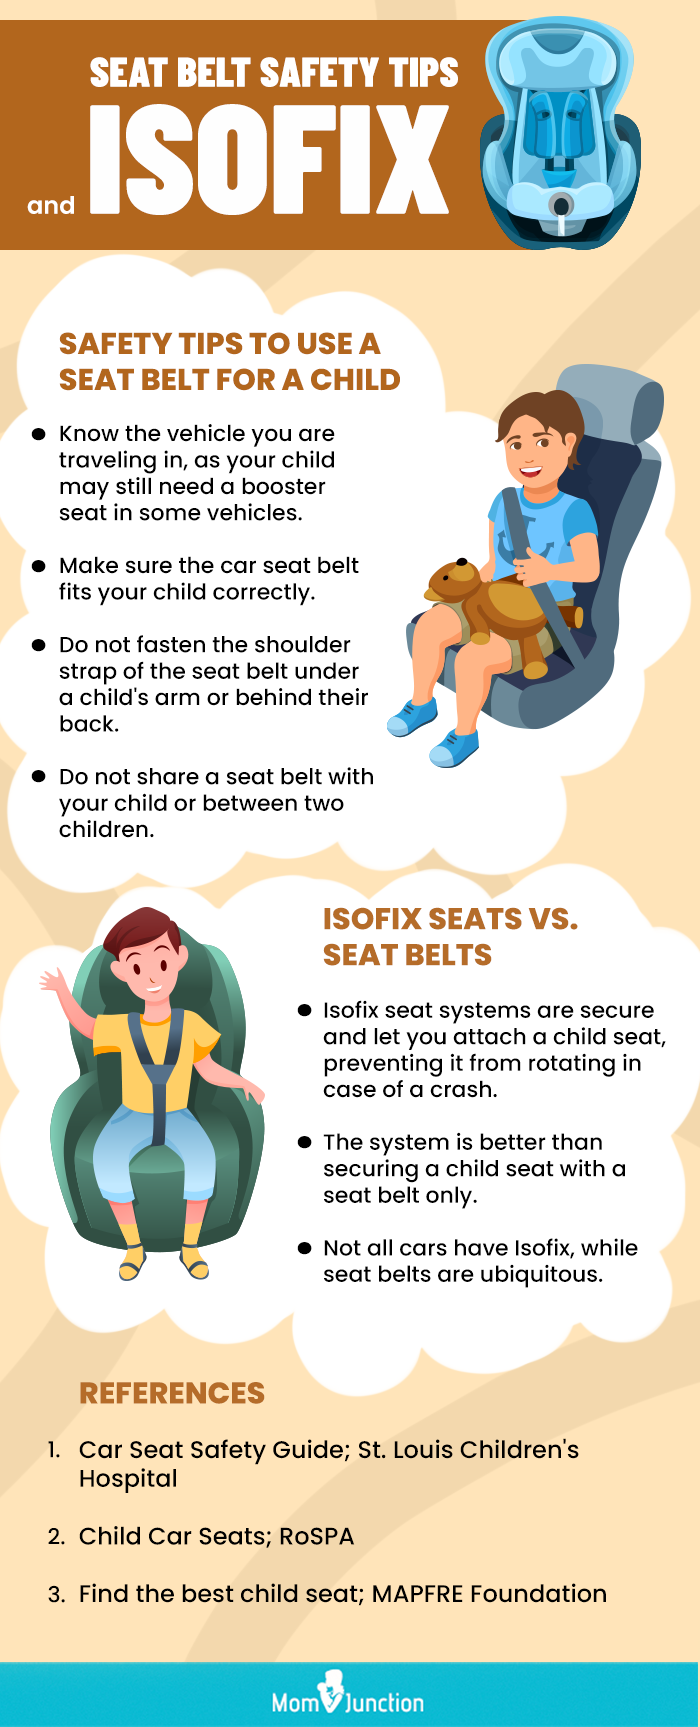 seat belt safety tips and isofix [infographic]